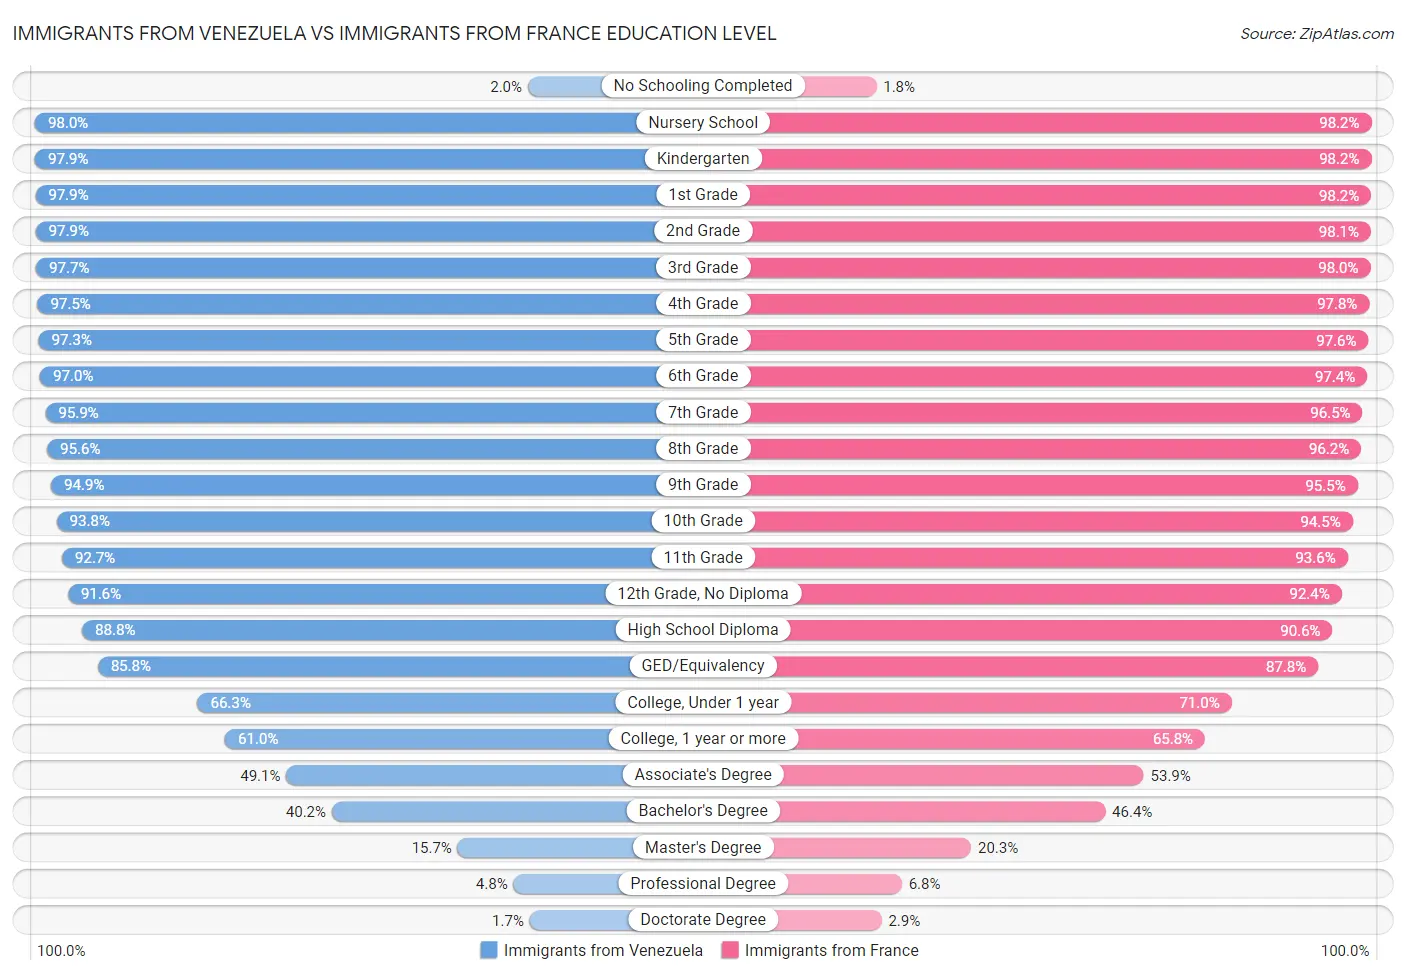 Immigrants from Venezuela vs Immigrants from France Education Level